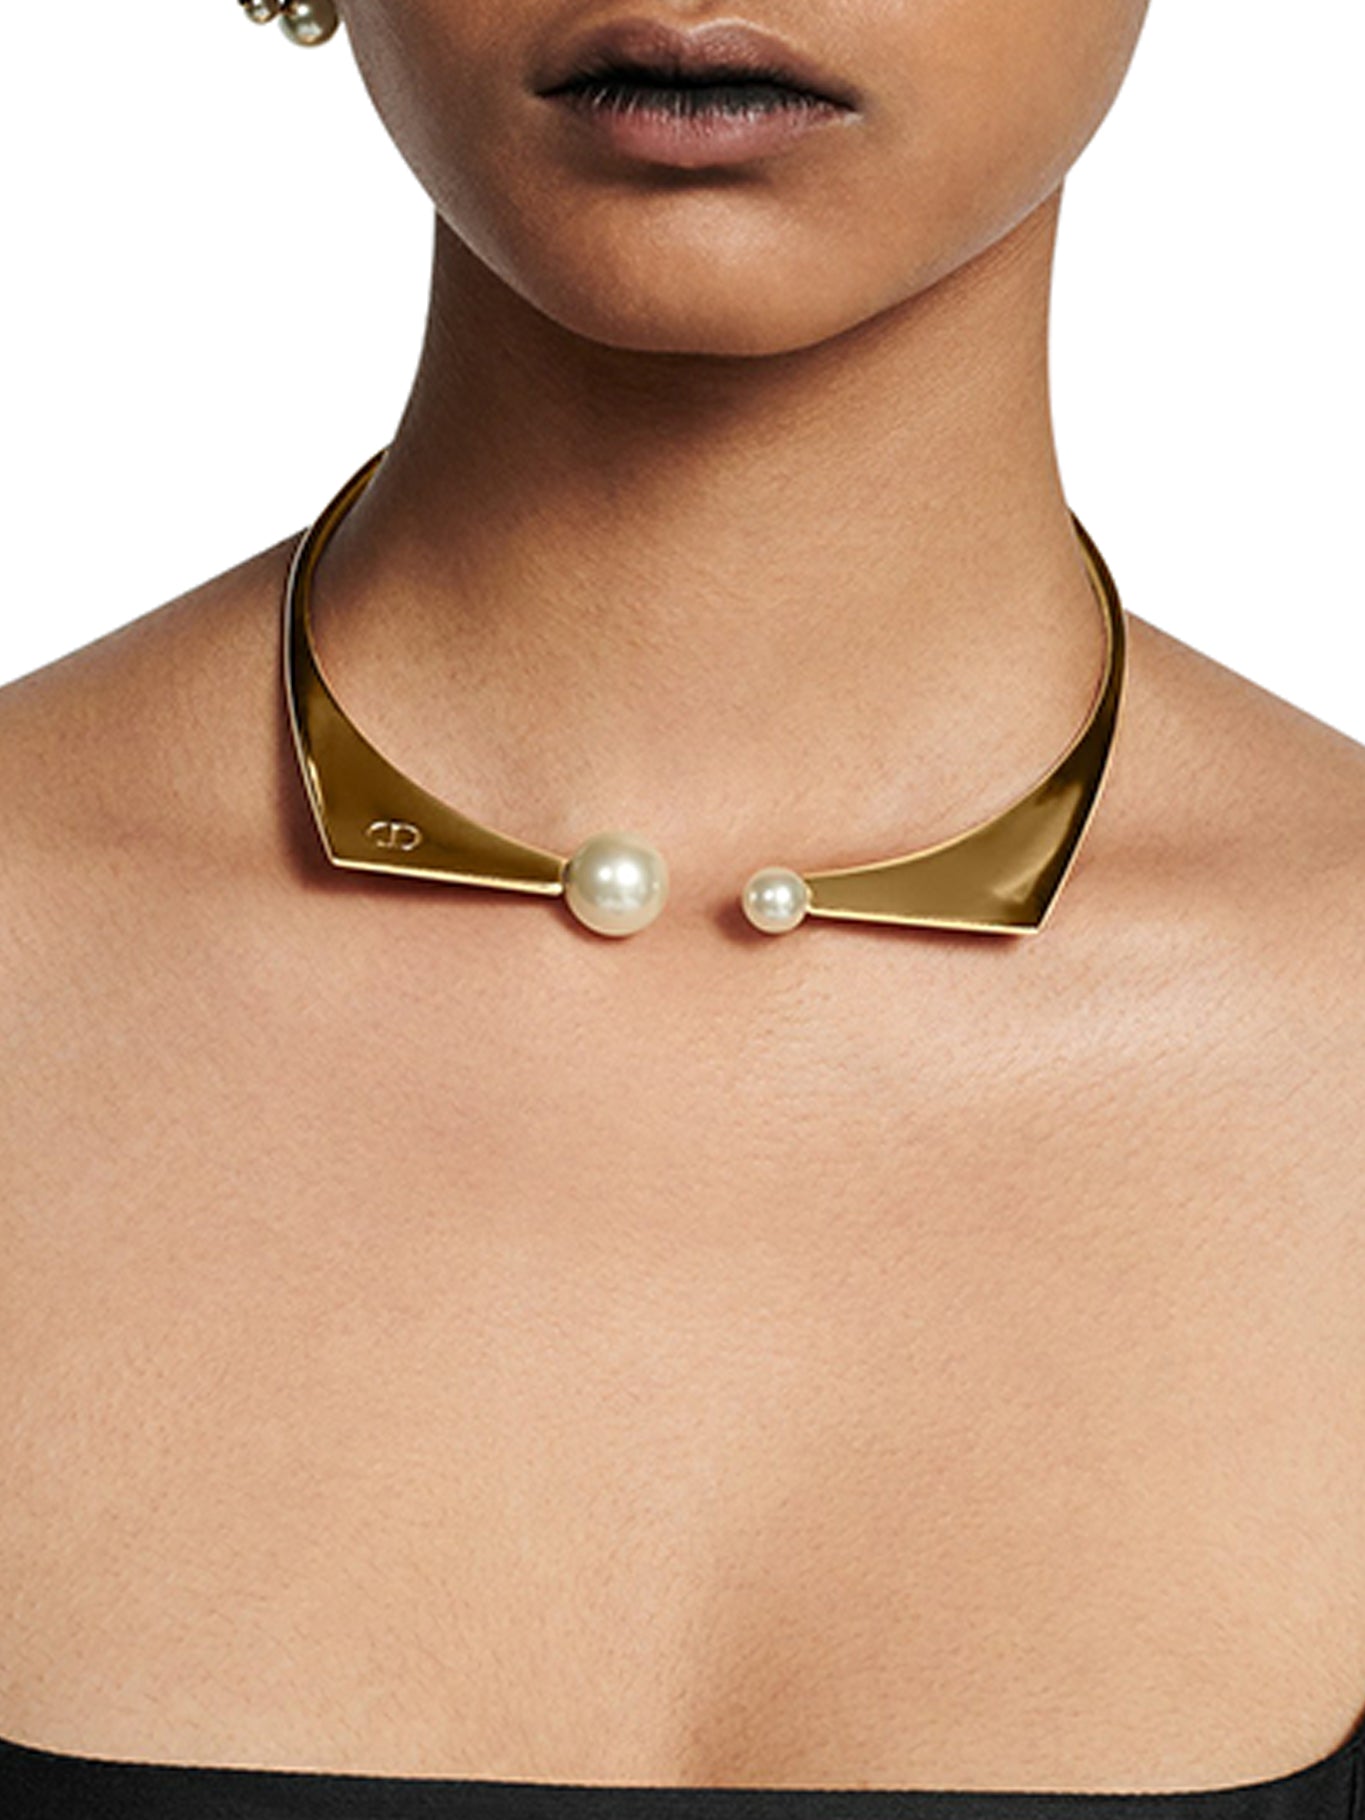 Dior Tribales New Look necklace